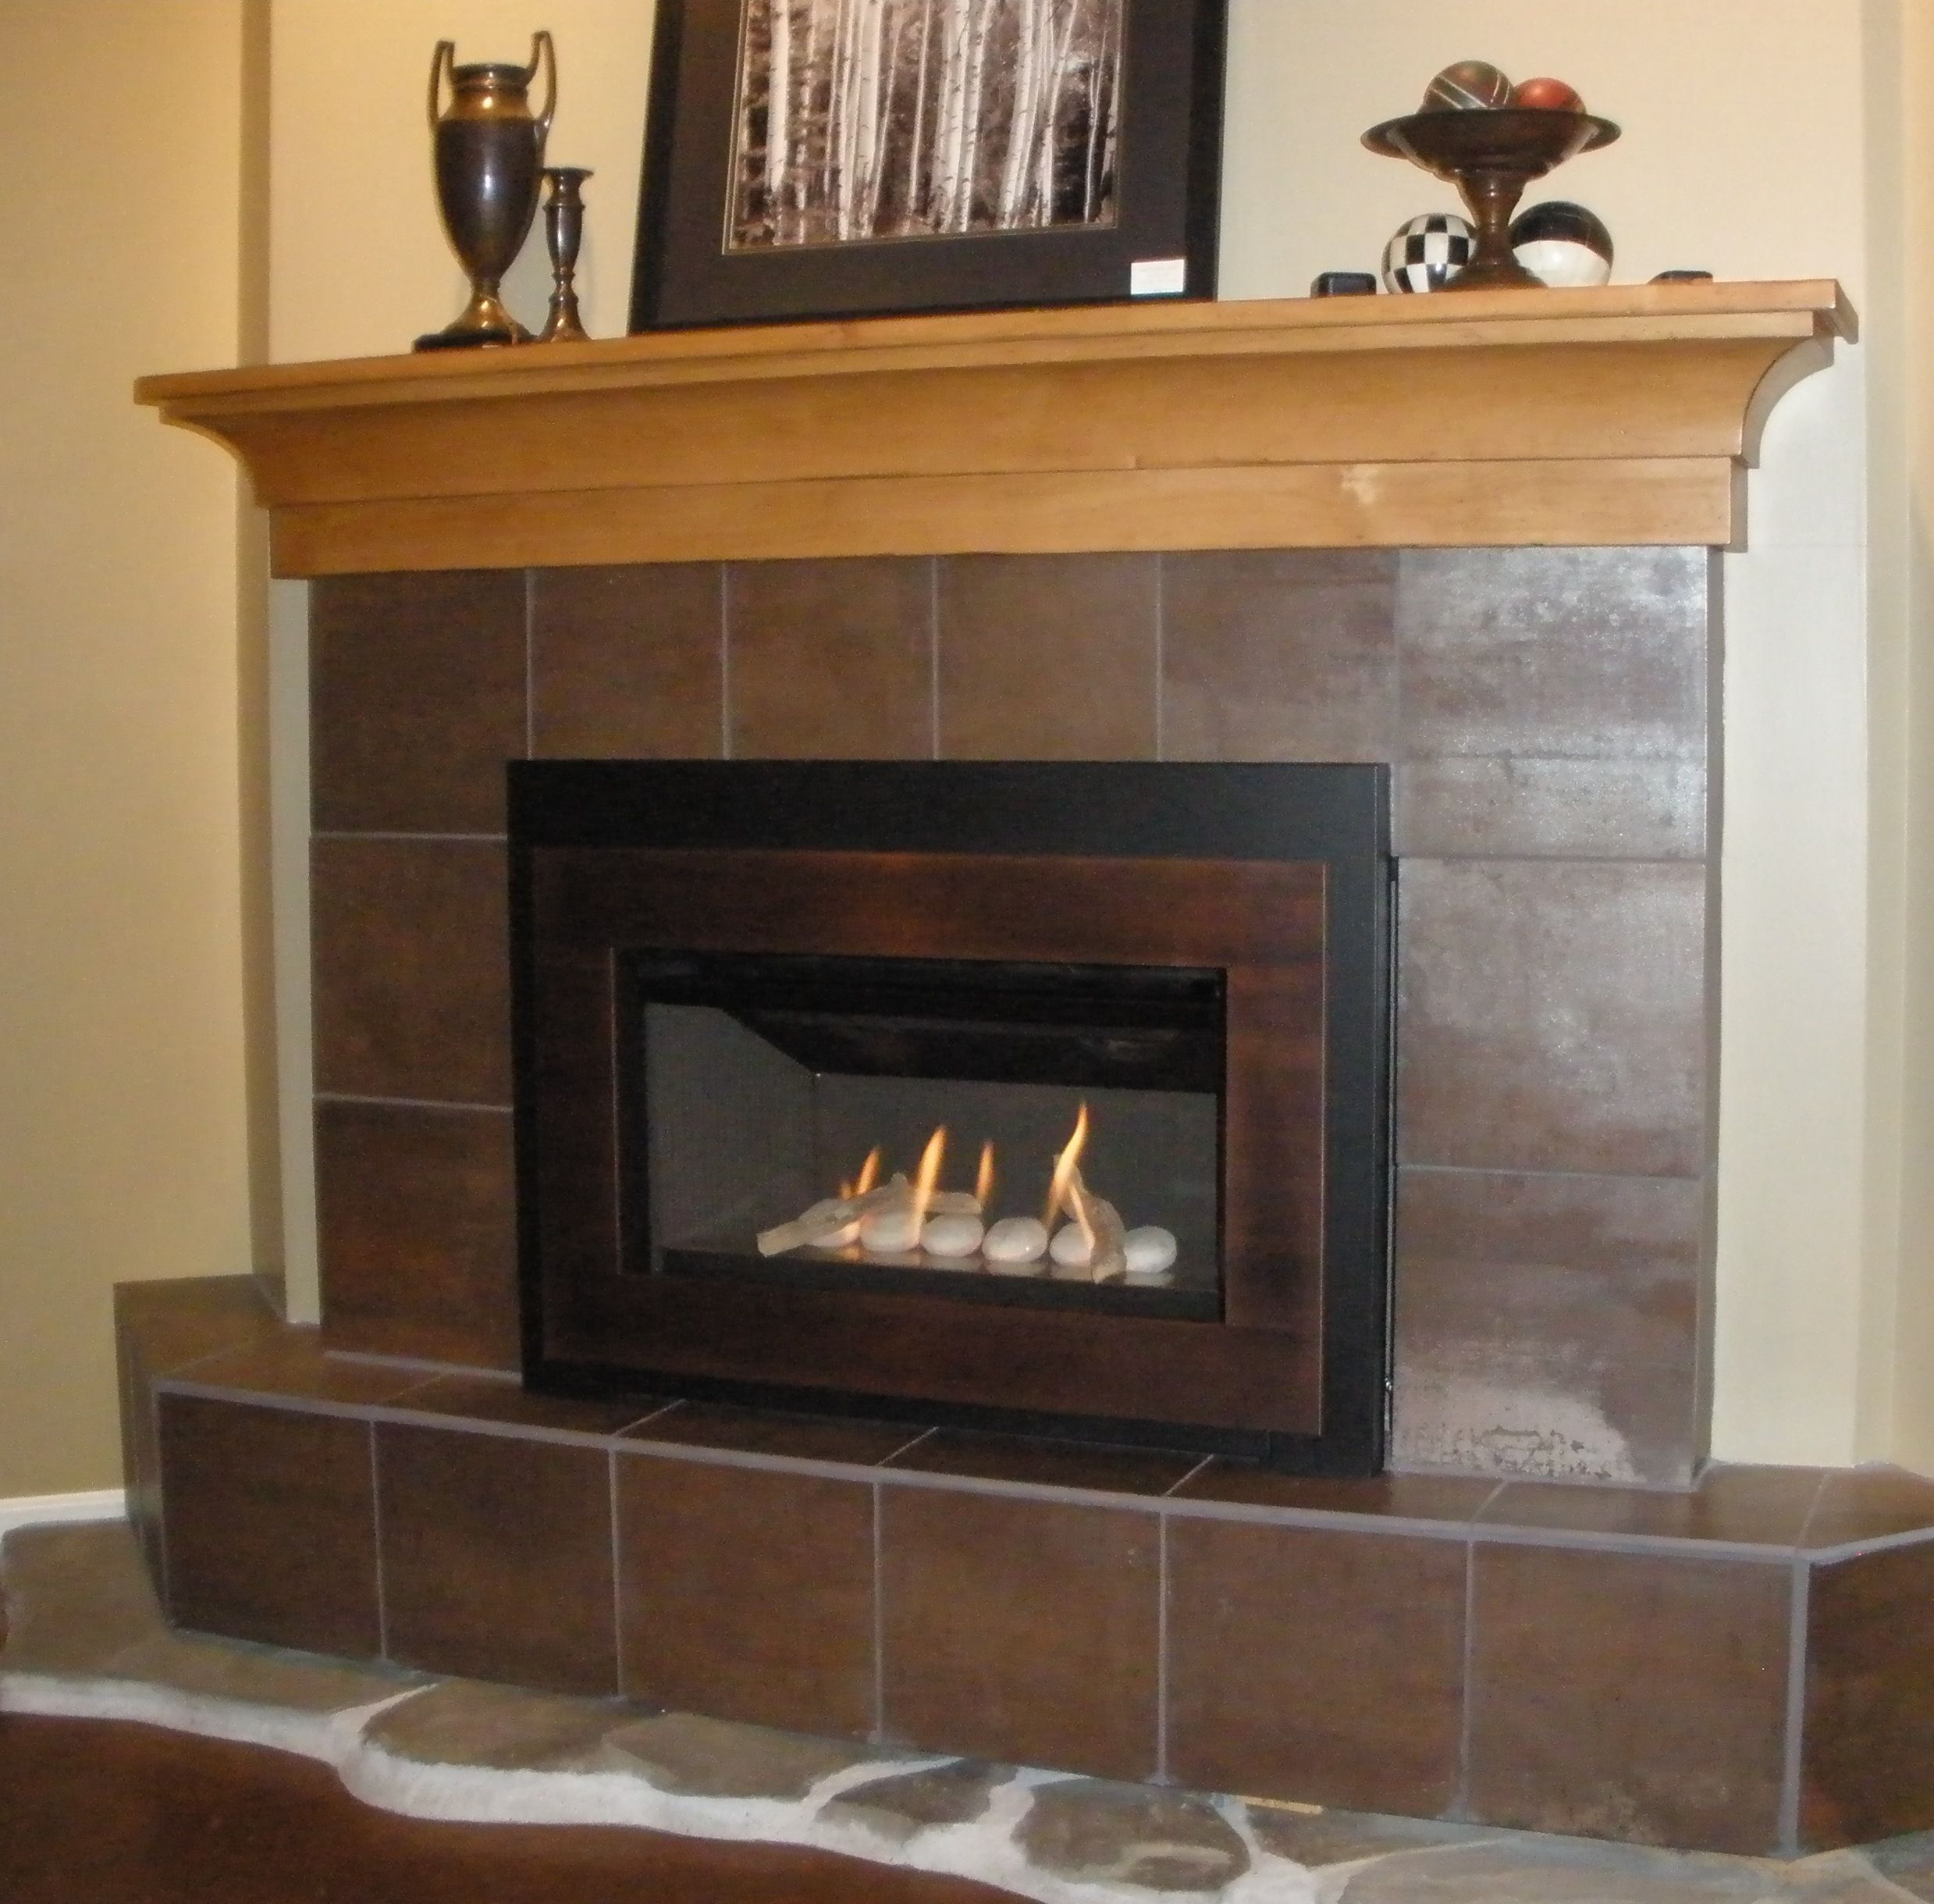 Fireplace Rocks for Gas Fireplace Fresh Pin On Valor Radiant Gas Fireplaces Midwest Dealer